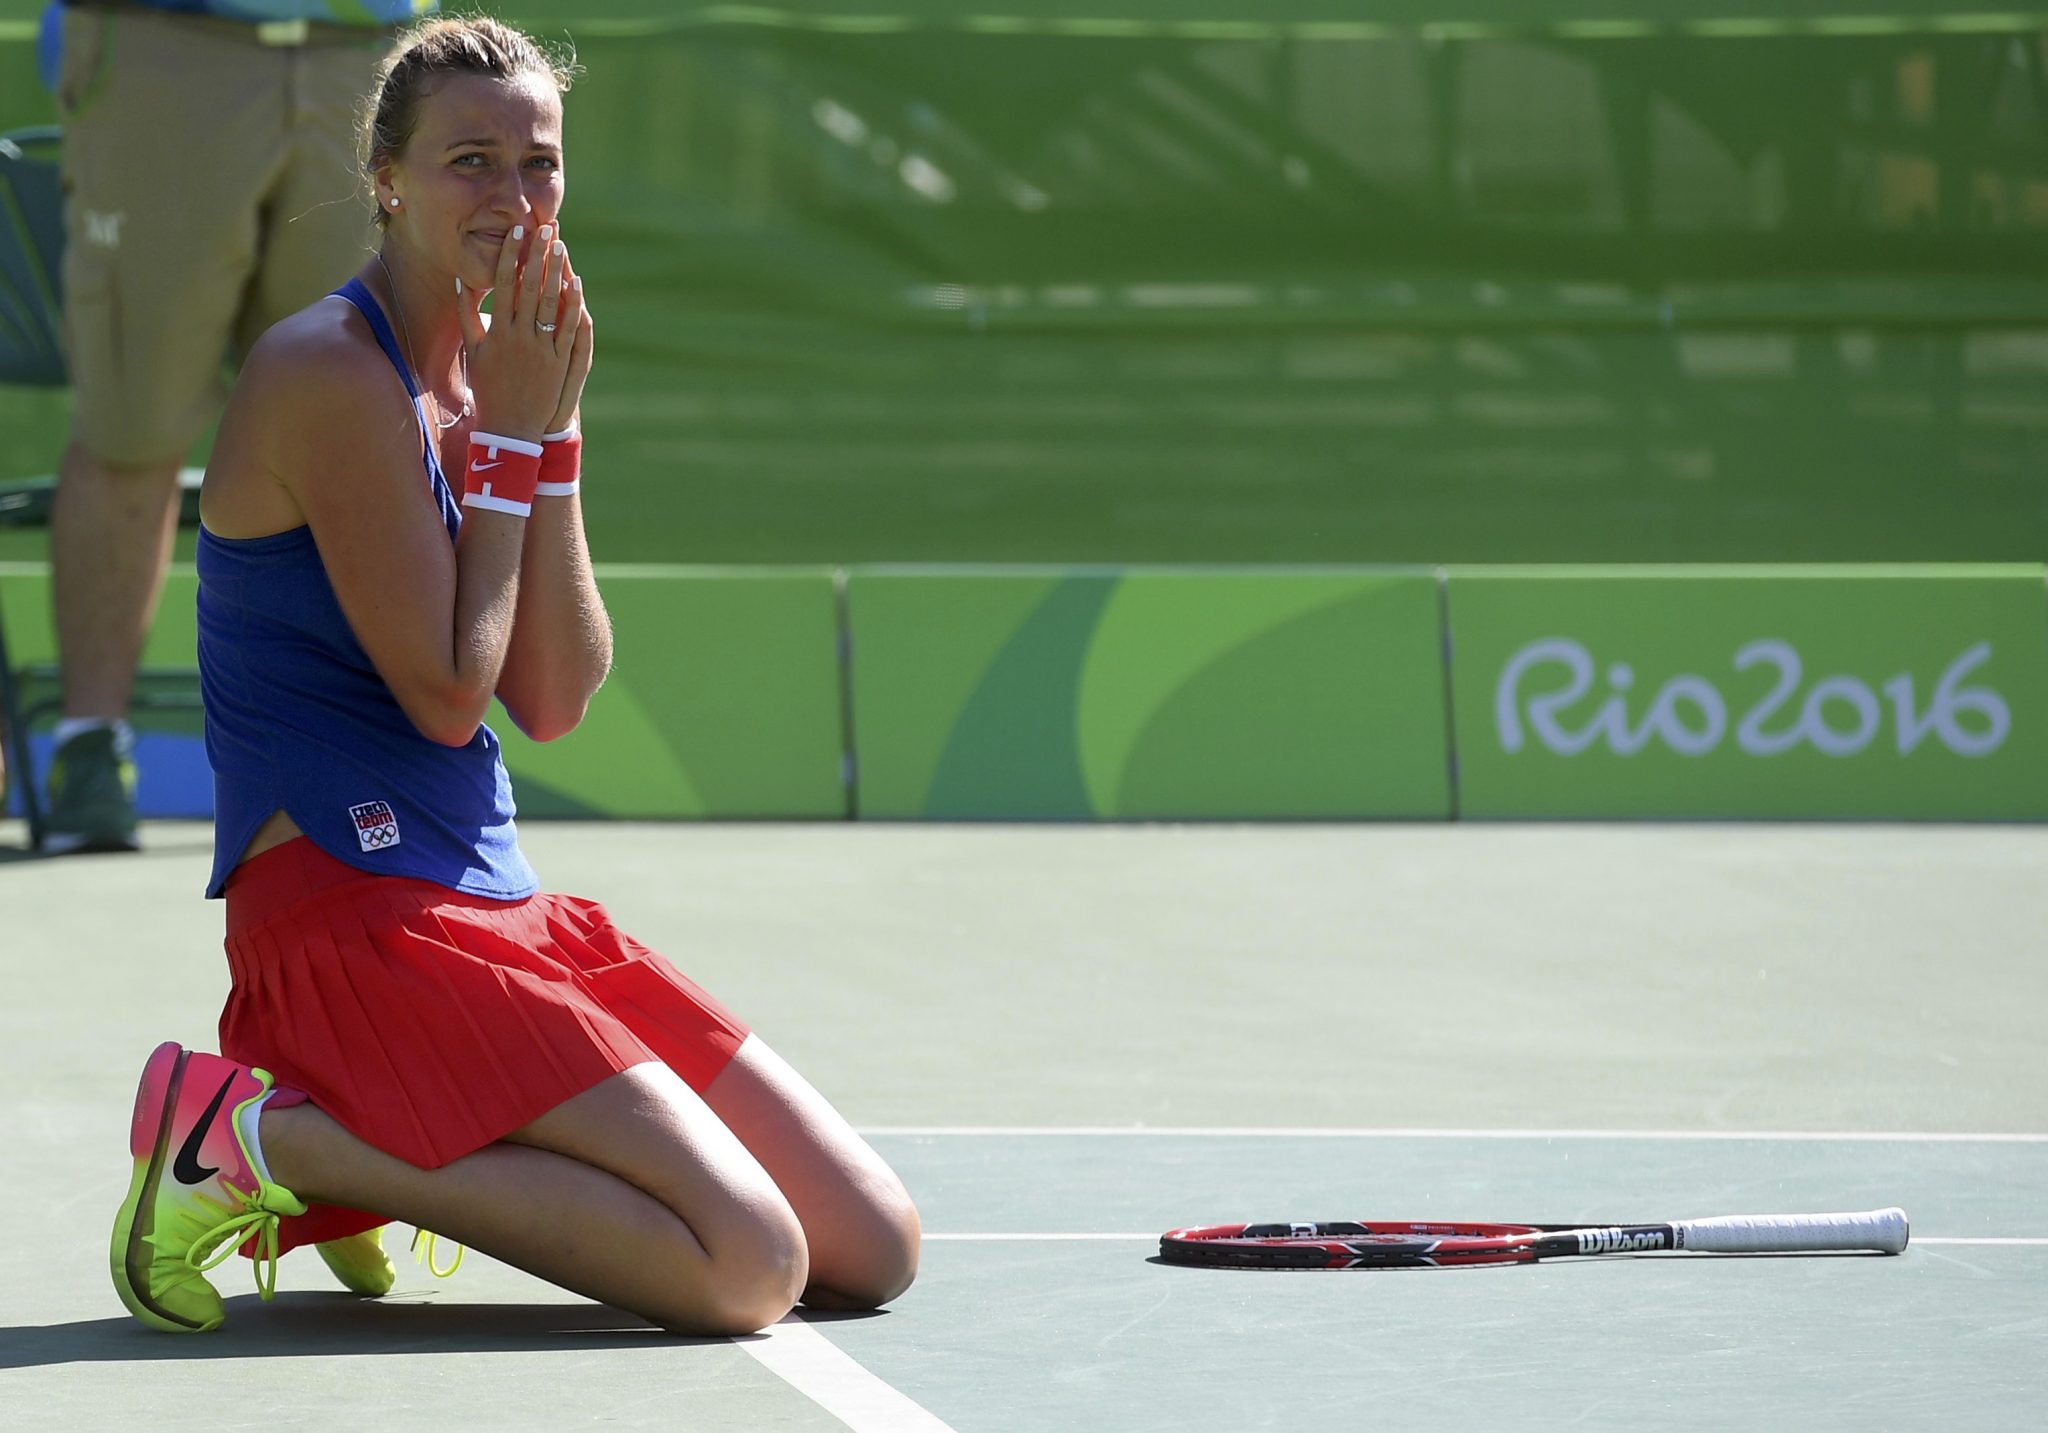 2016 Rio Olympics - Tennis - Final - Women's Singles Bronze Medal Match - Olympic Tennis Centre - Rio de Janeiro, Brazil - 13/08/2016. Petra Kvitova (CZE) of Czech Republic celebrates after winning match against Madison Keys (USA) of USA. REUTERS/Toby Melville FOR EDITORIAL USE ONLY. NOT FOR SALE FOR MARKETING OR ADVERTISING CAMPAIGNS.